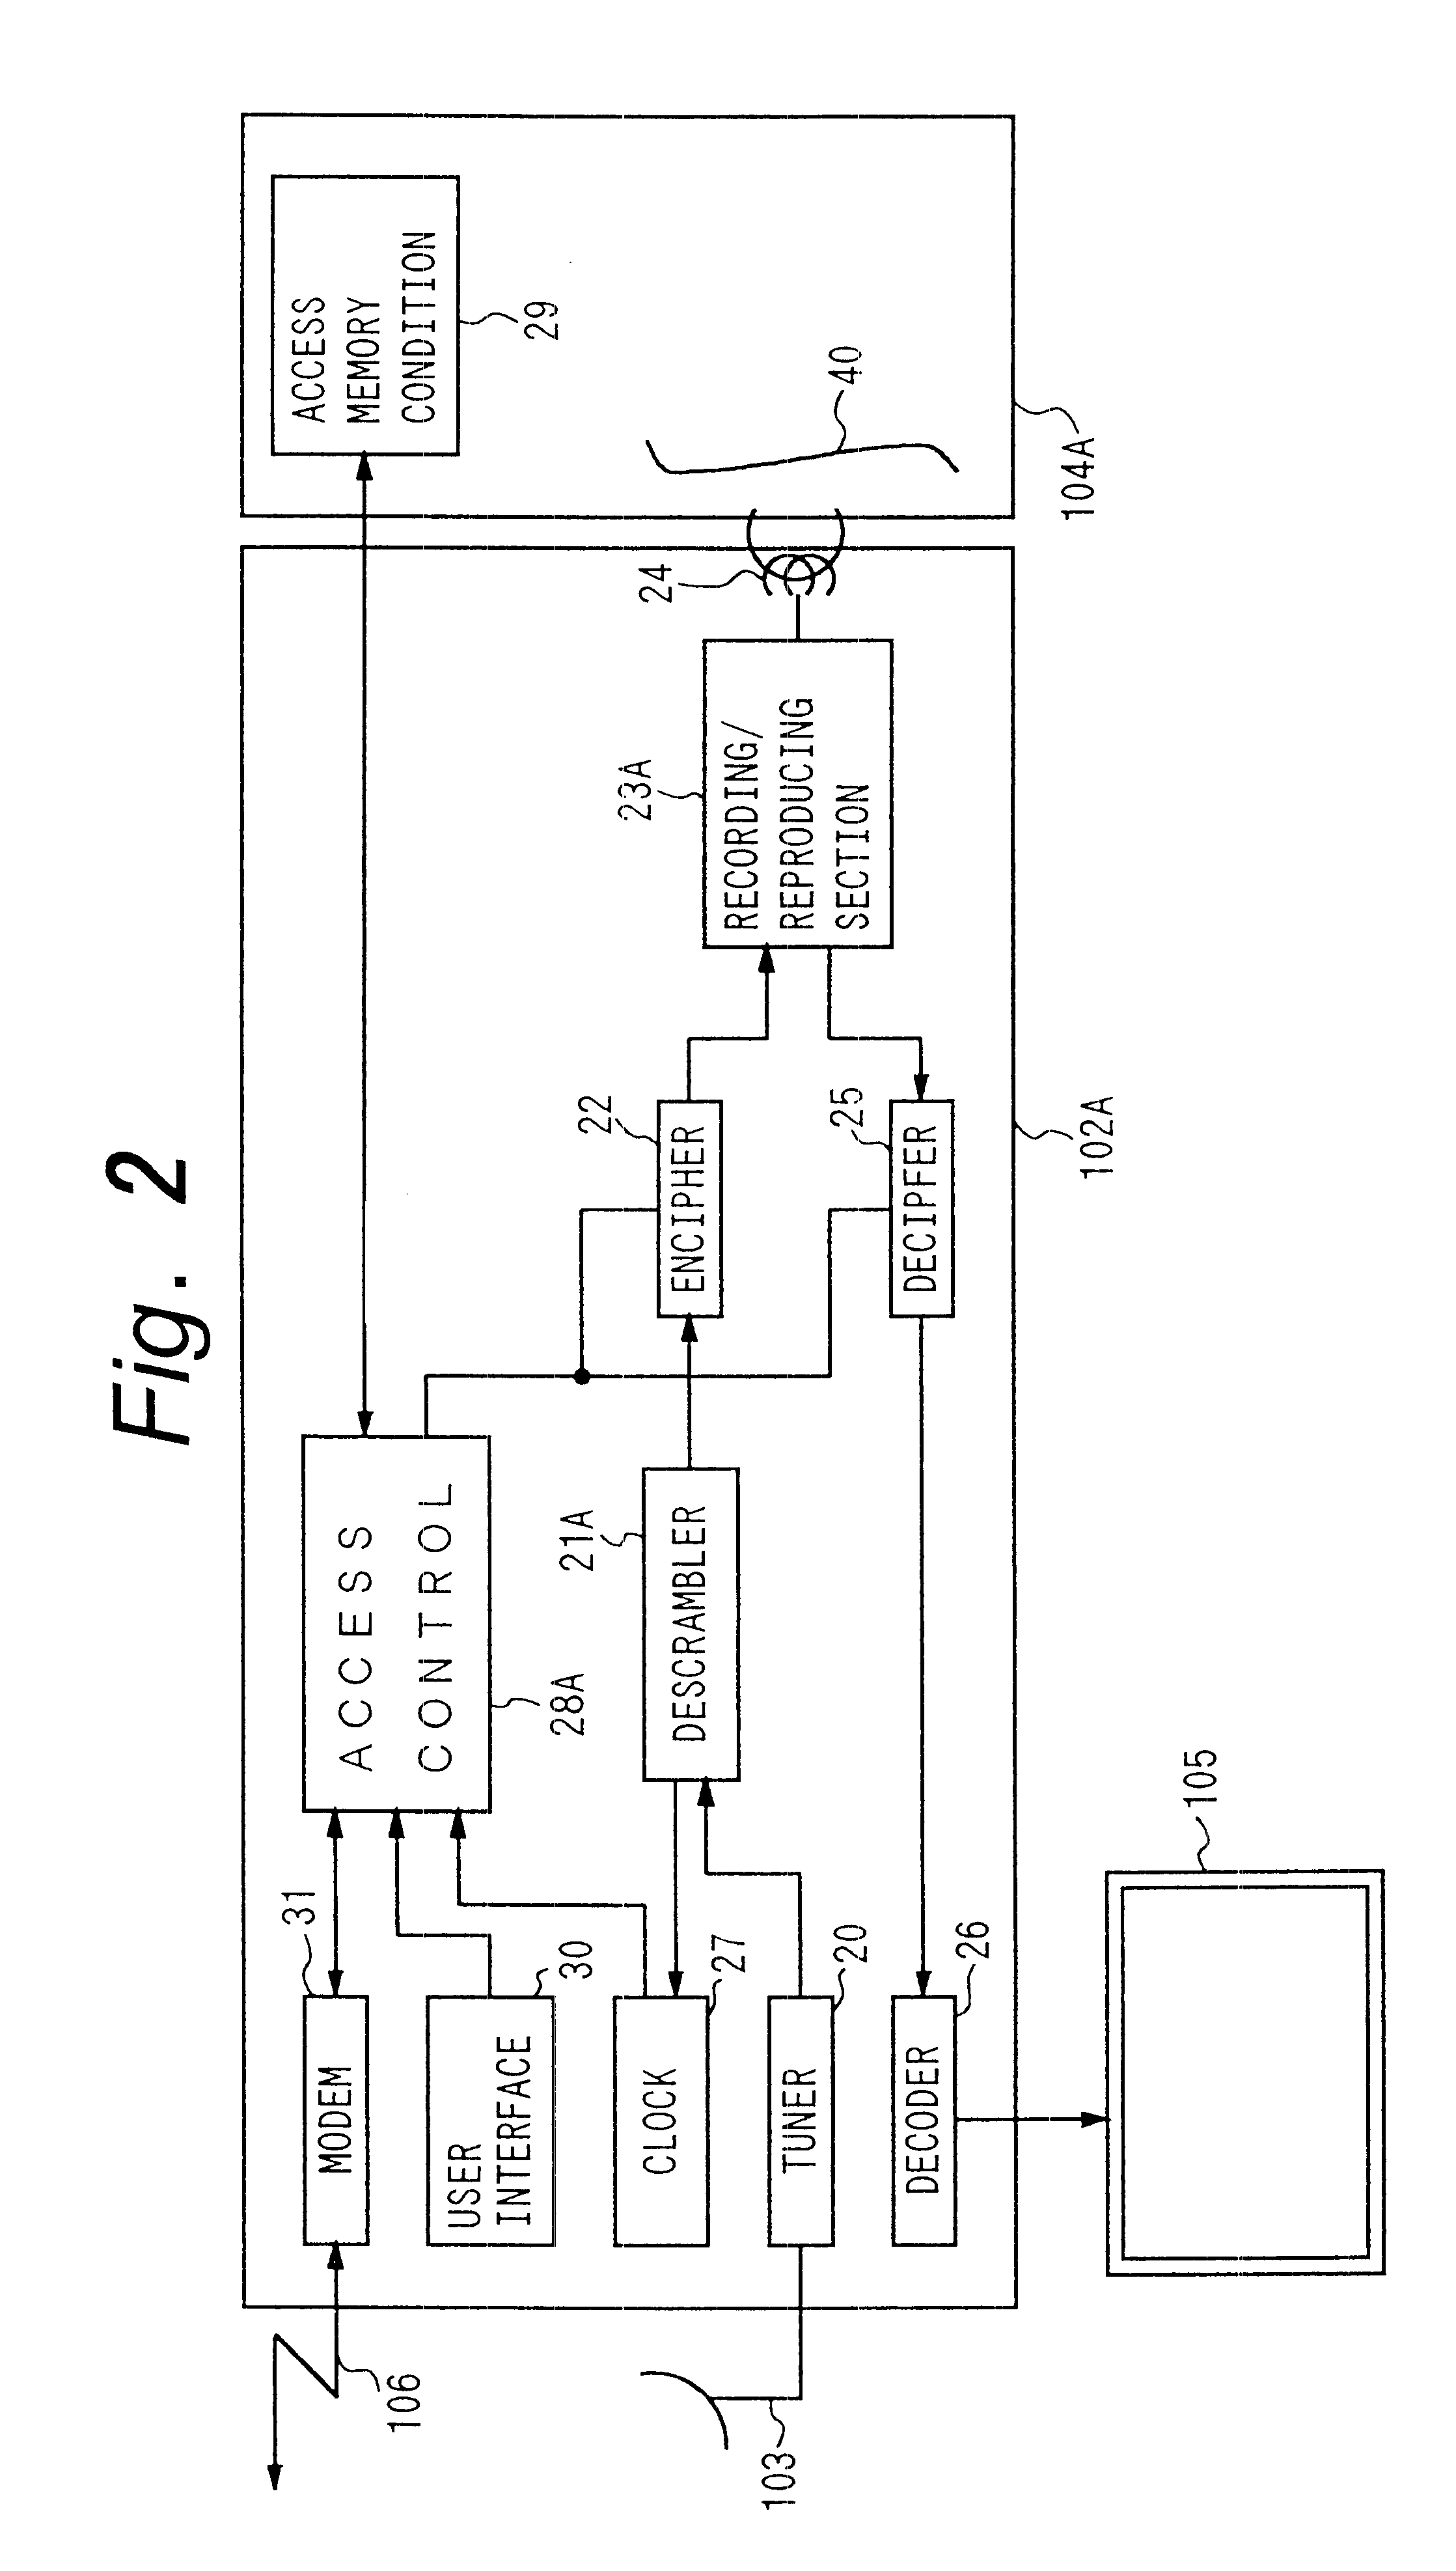 Controlled-access broadcast signal receiving system